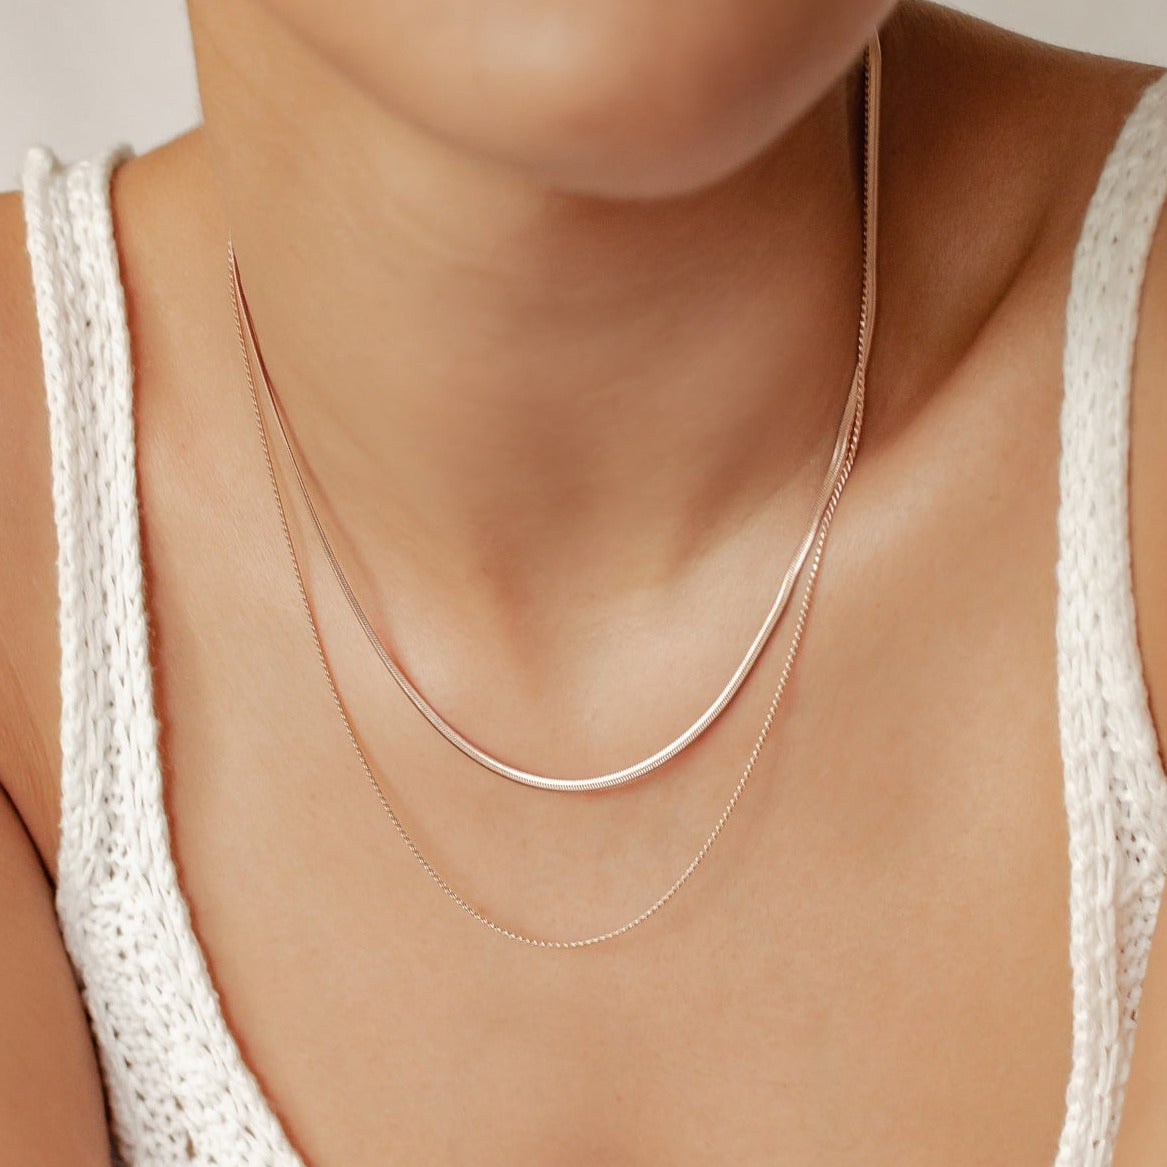 Delicate Layered Necklace Snake Chain Rose Gold